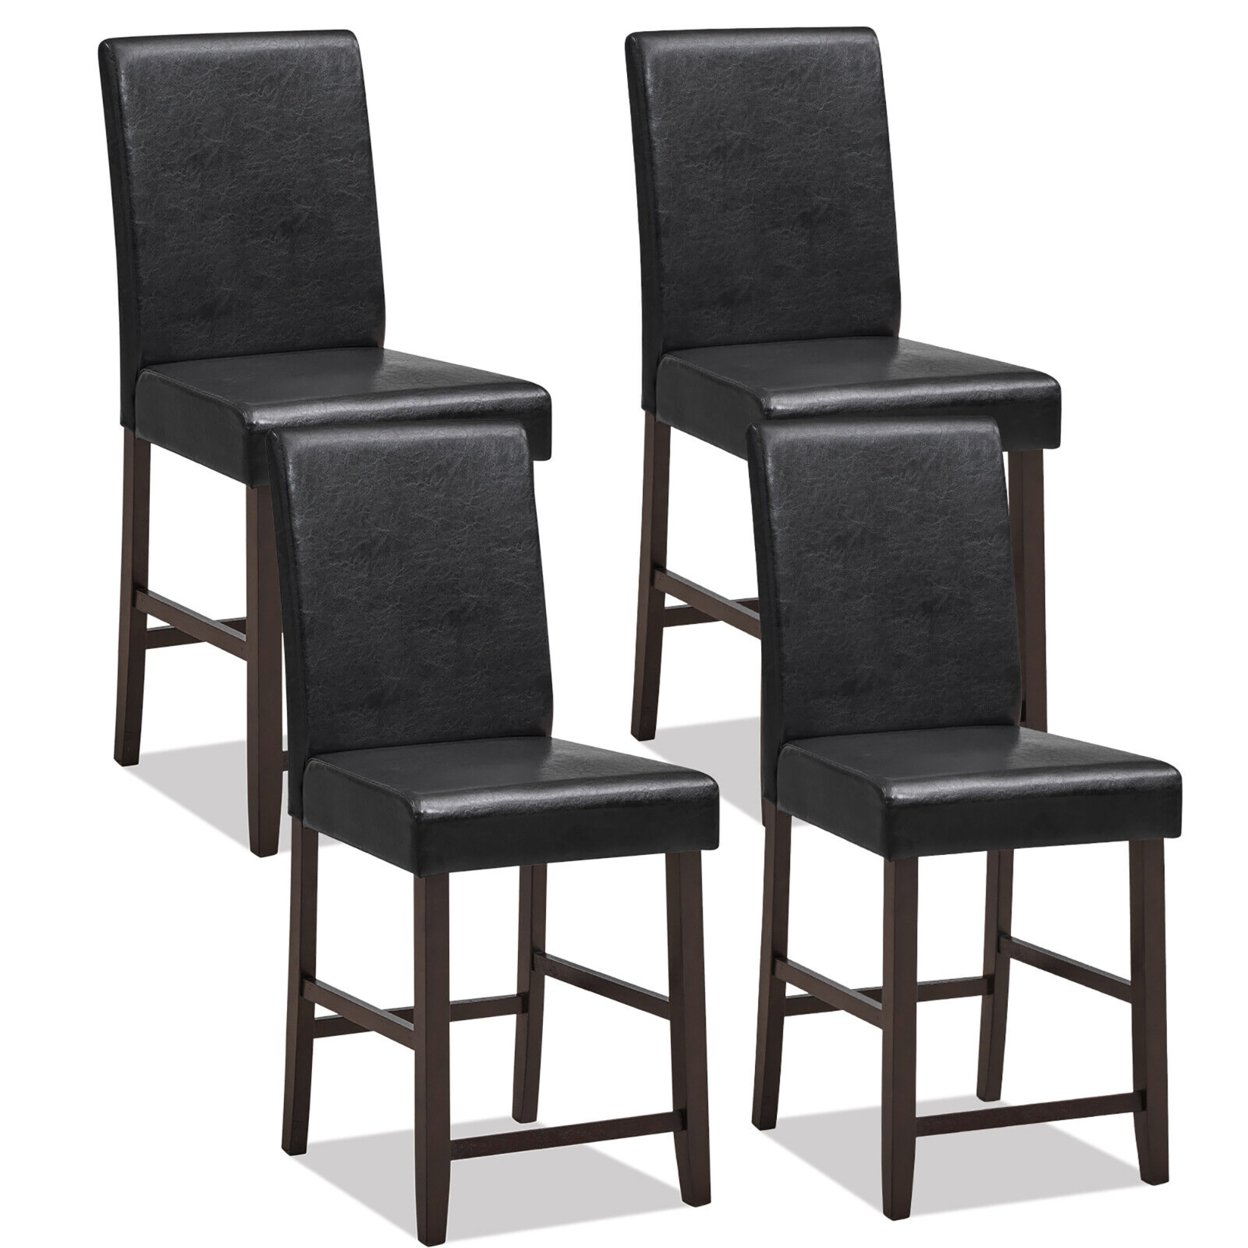 Set Of 4 Bar Stools 24'' Counter Height Pub Kitchen Chairs W/ Rubber Wood Legs